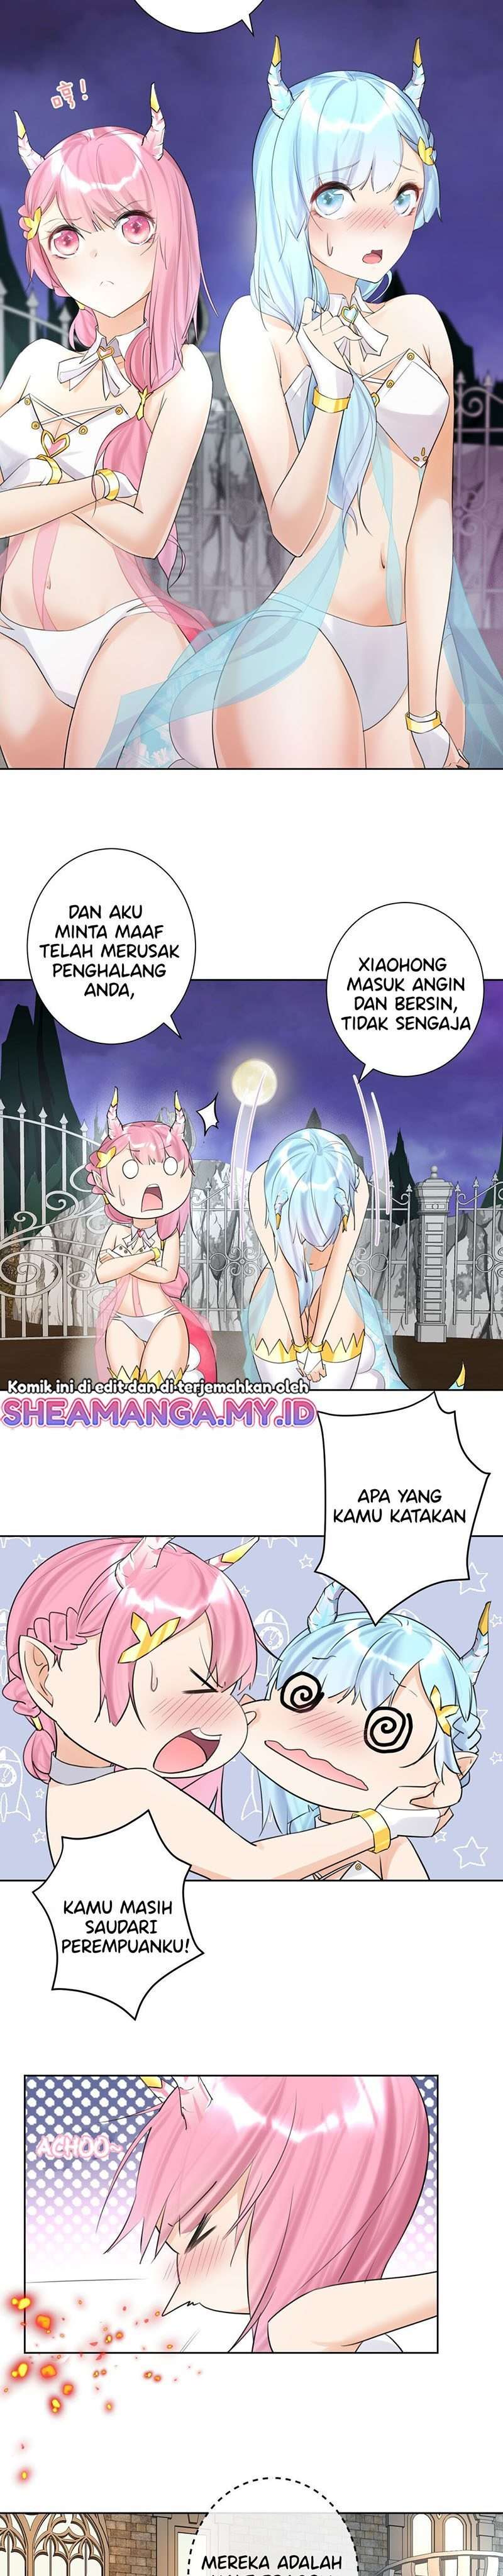 I Conquered A Religion, And With It Came A Harem Chapter 08